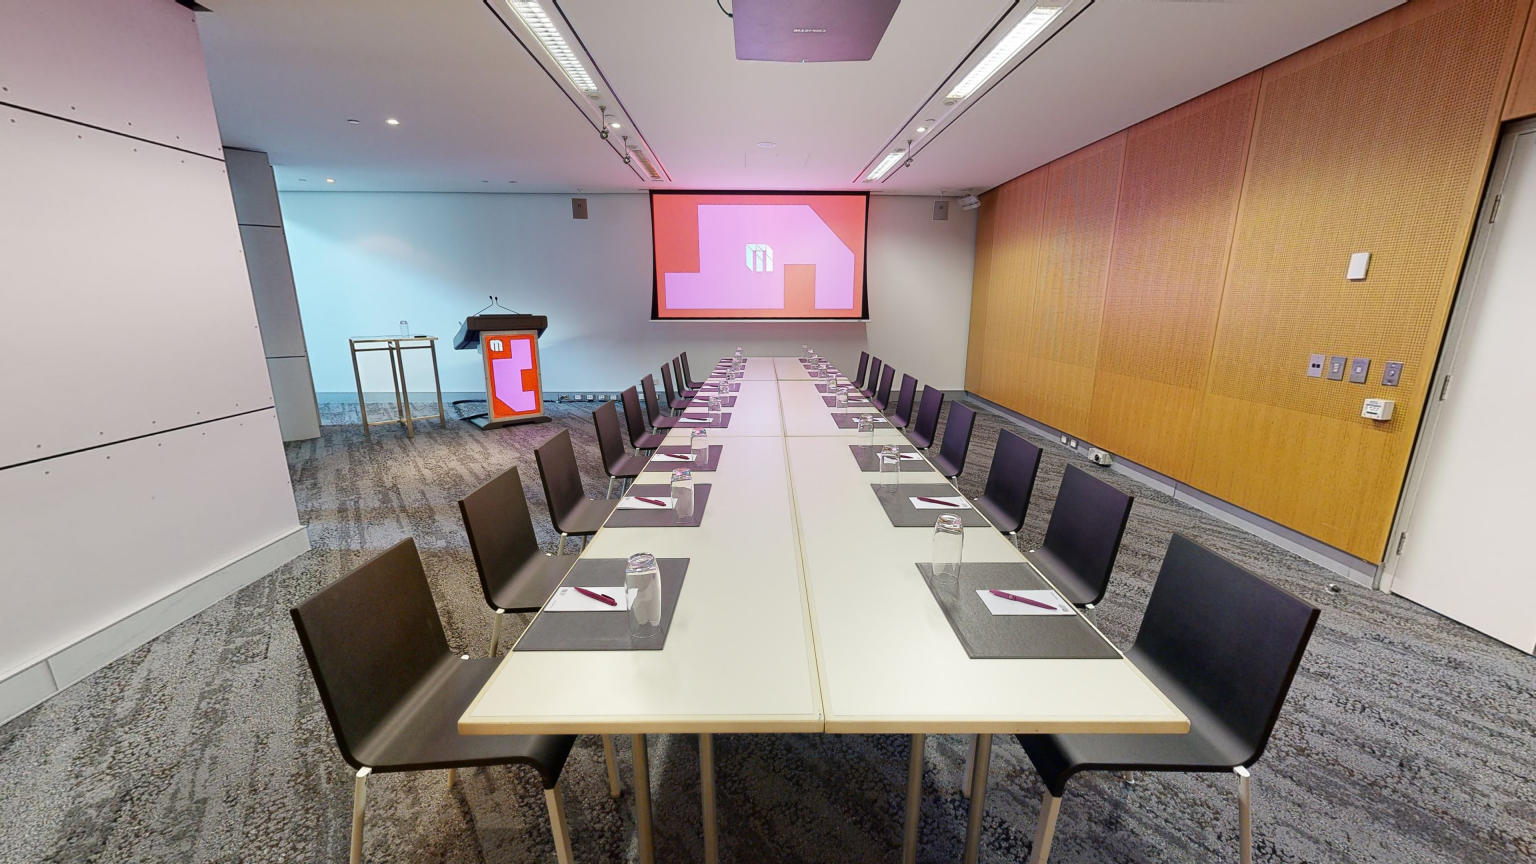 A conference or meeting room featuring a spacious boardroom layout equipped with a sizable screen and comfortable chairs for attendees. A lectern also sits in the corner to the left of the screen.